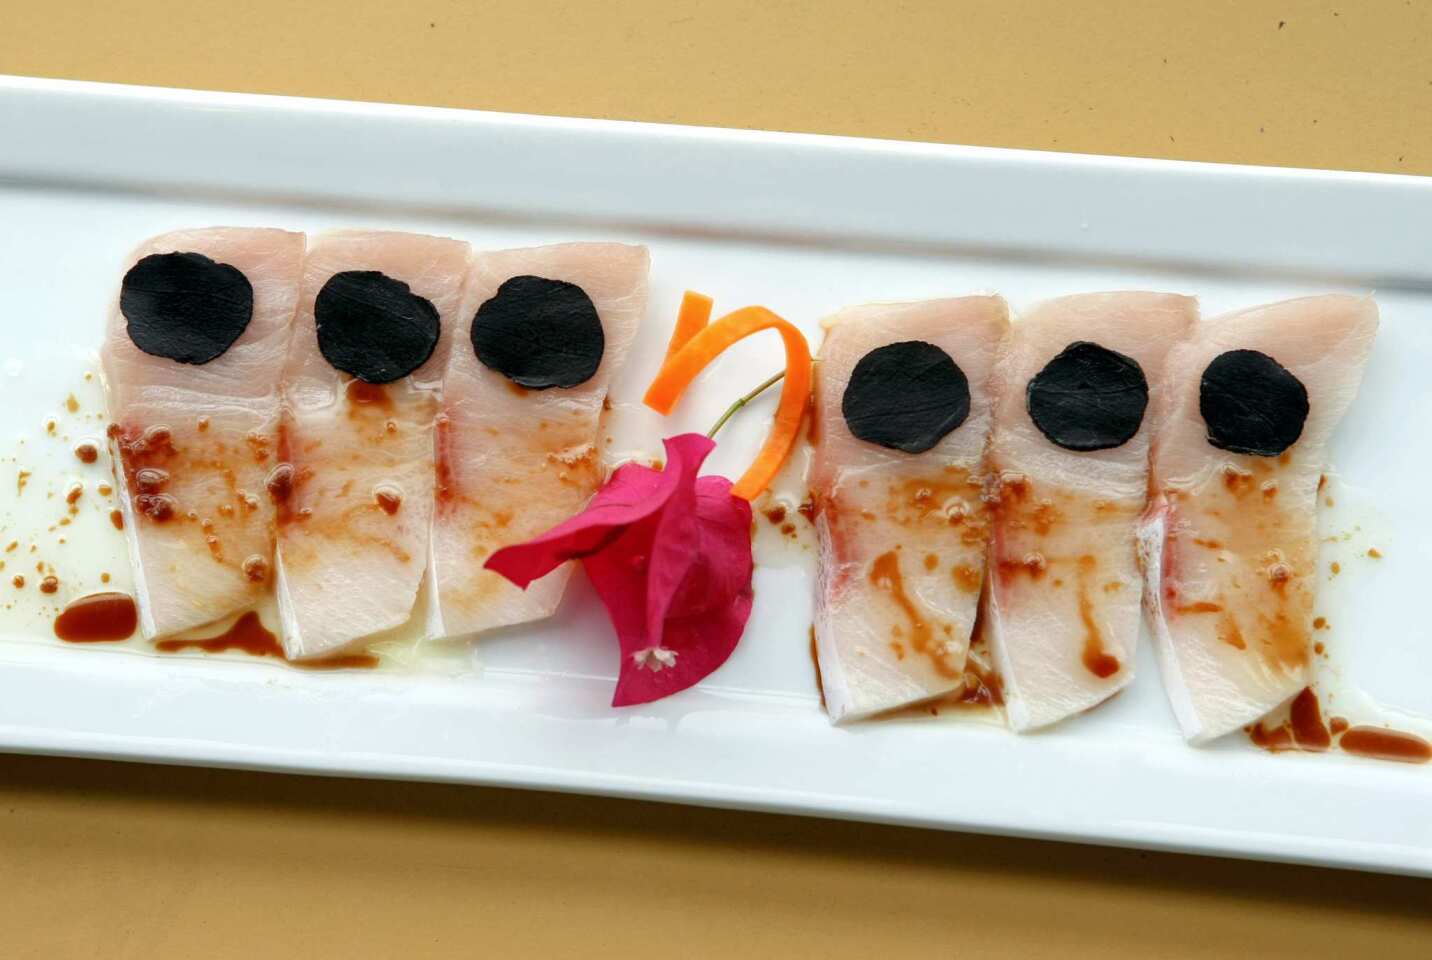 Yellowtail sashimi with black truffles is one of the items served at Got Sushi? in Northridge.